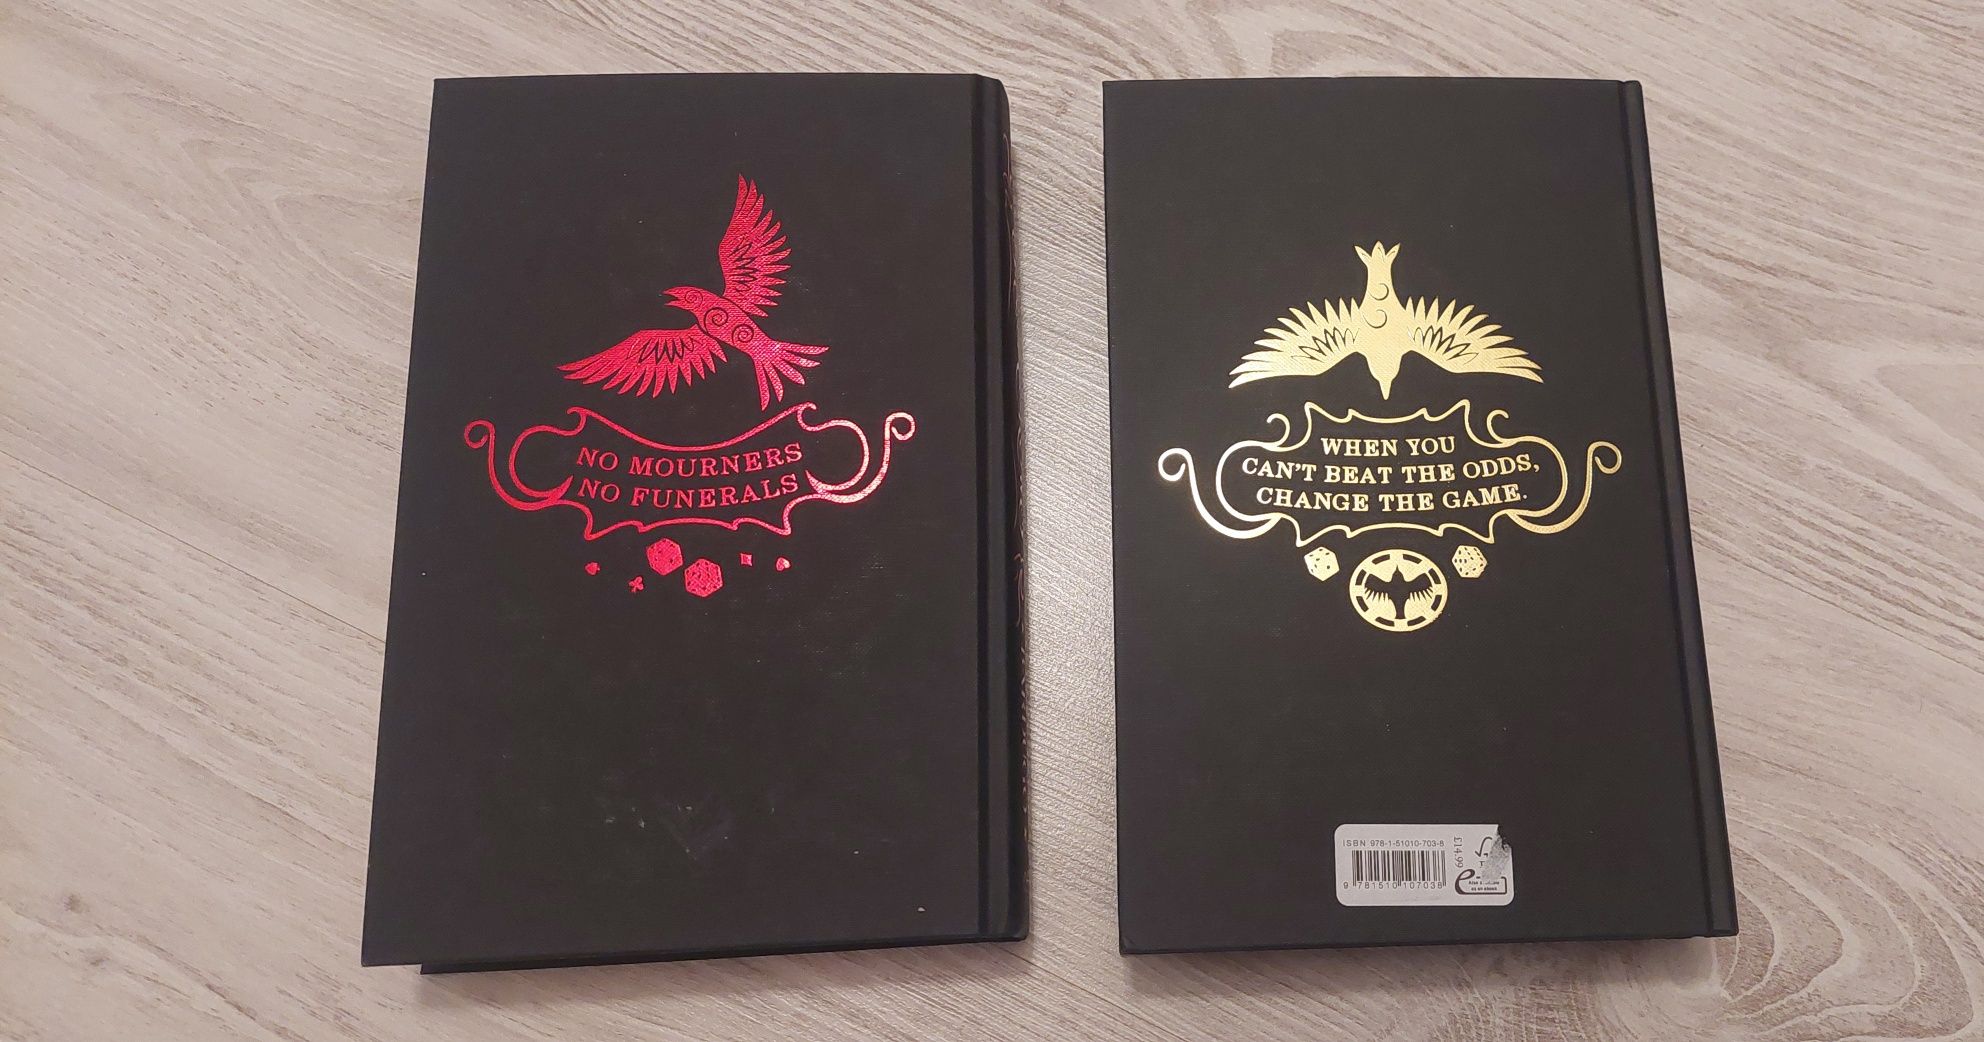 Six of Crows, Collector's edition, L. Bardugo,